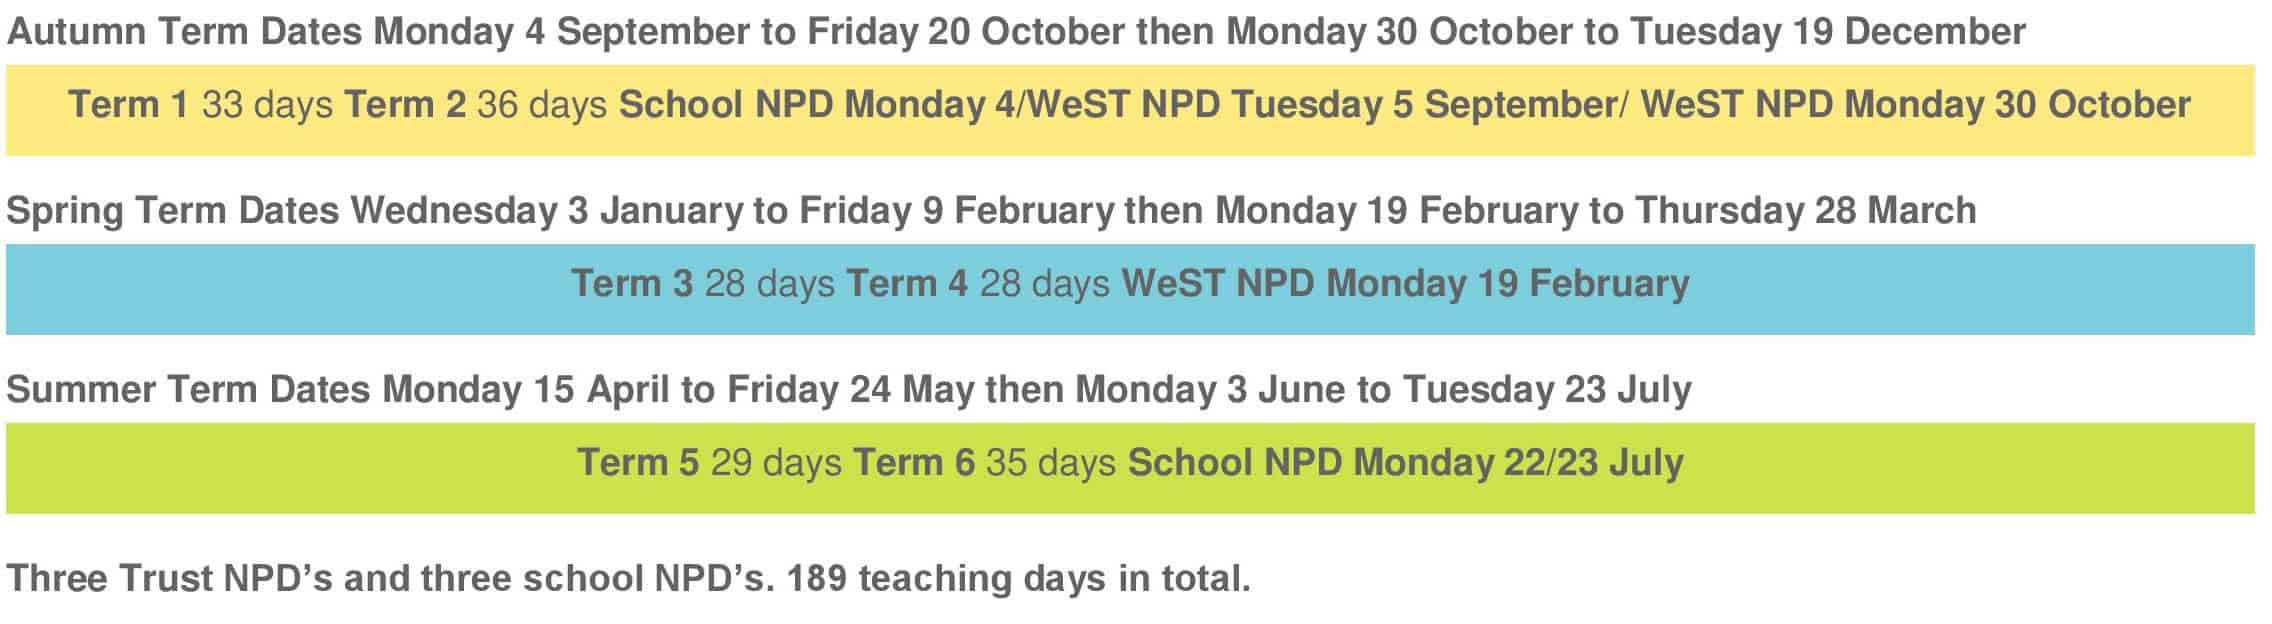 Timing of the School Day and Term Dates